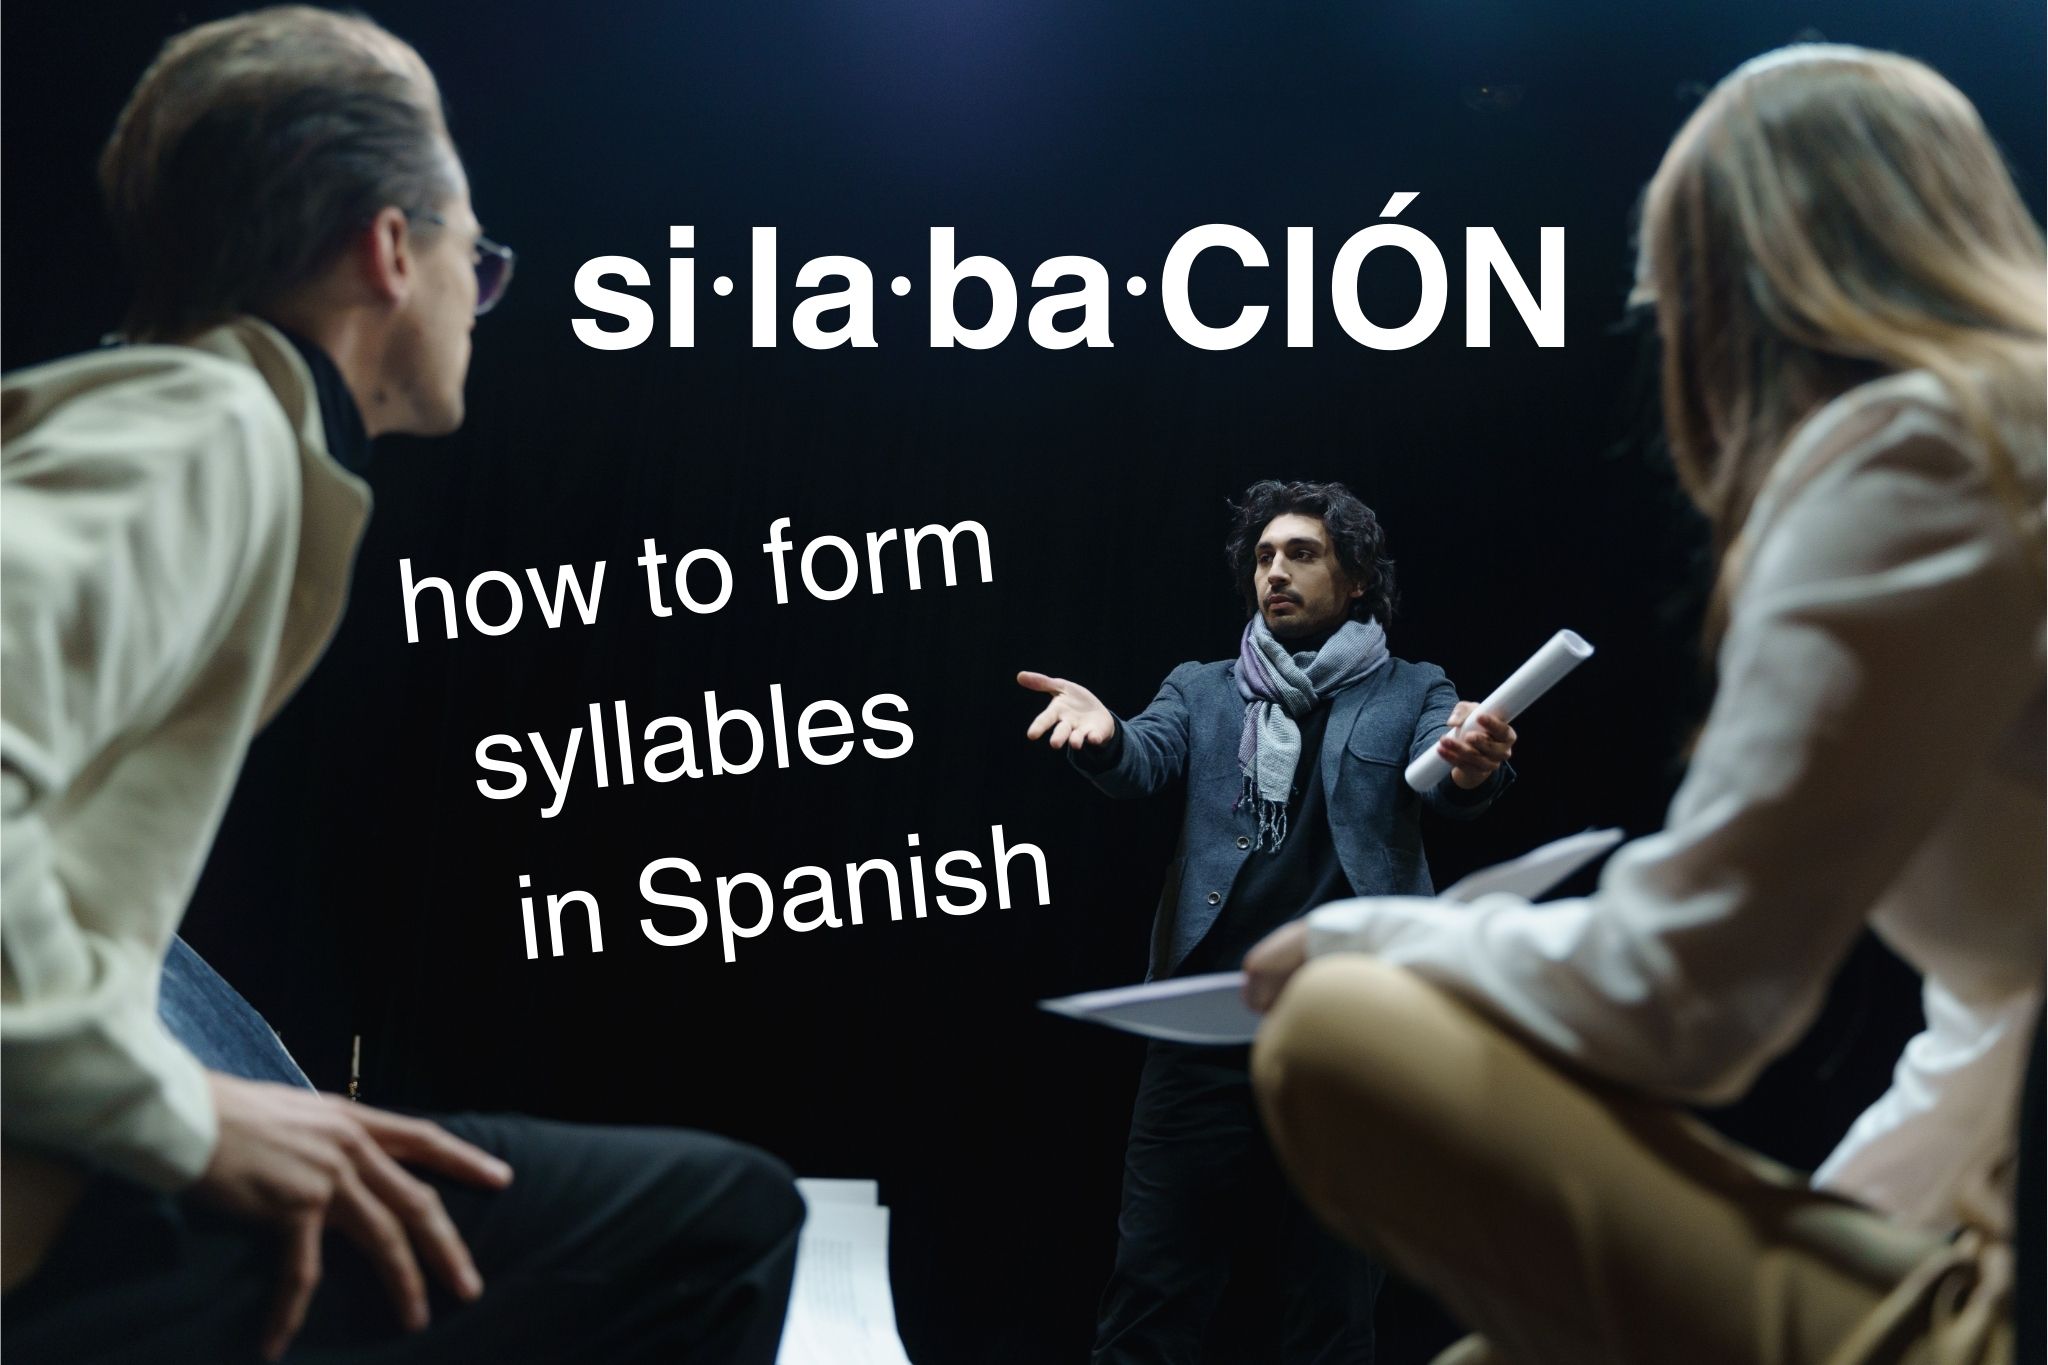 How to form syllables in Spanish